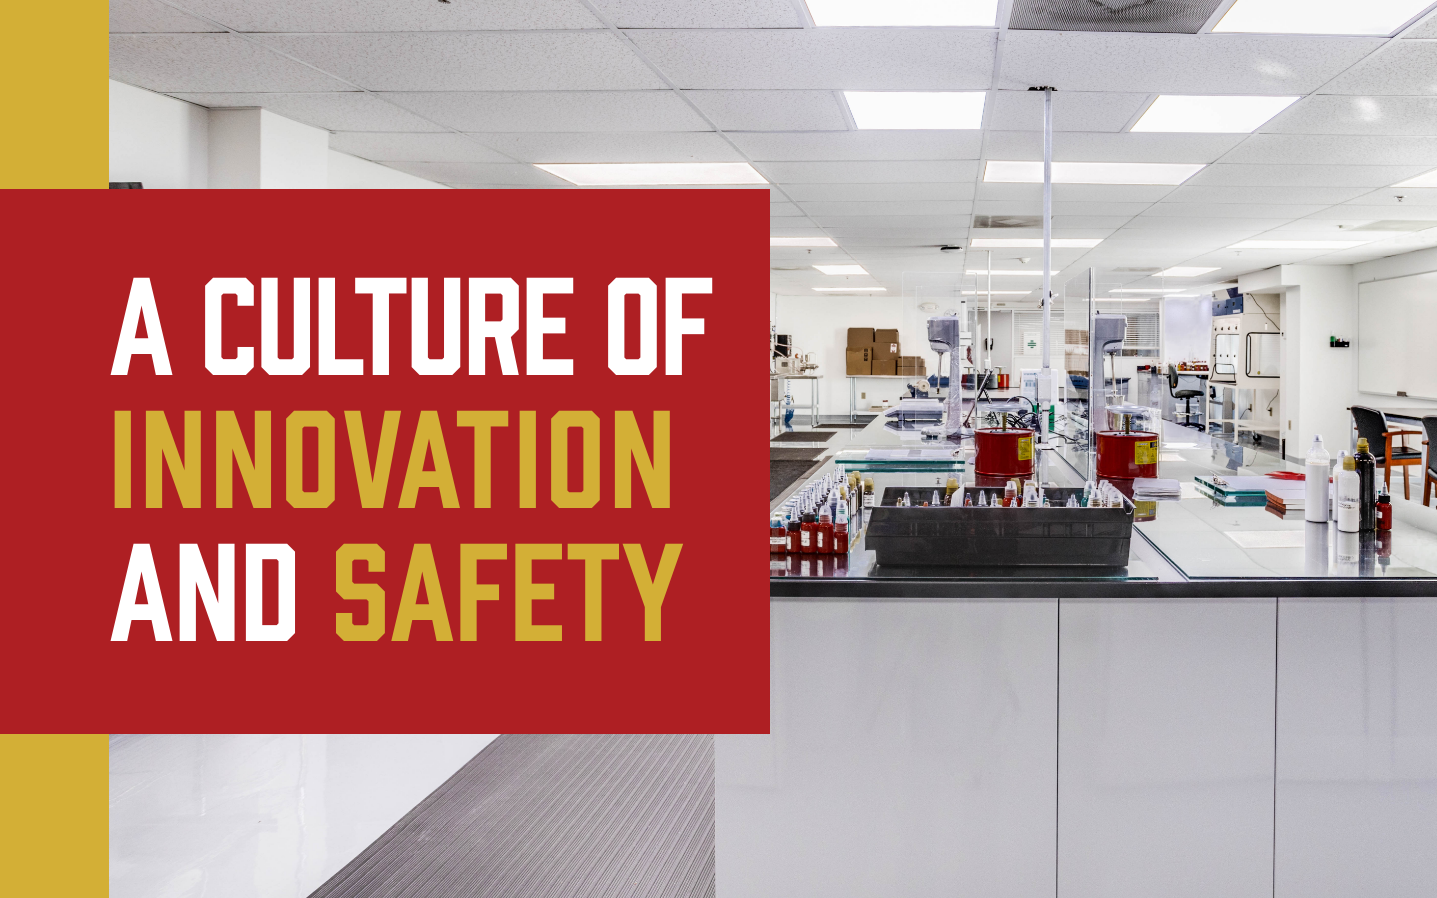 A Culture of Innovation and Safety